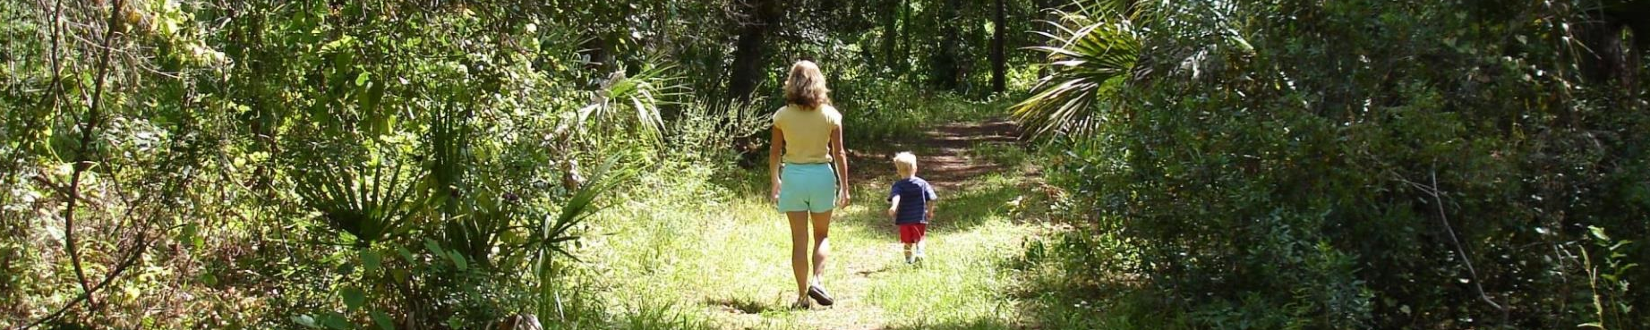 A woman and young child walk along a dirt trail through Red Bug Slough Preserve in Sarasota County